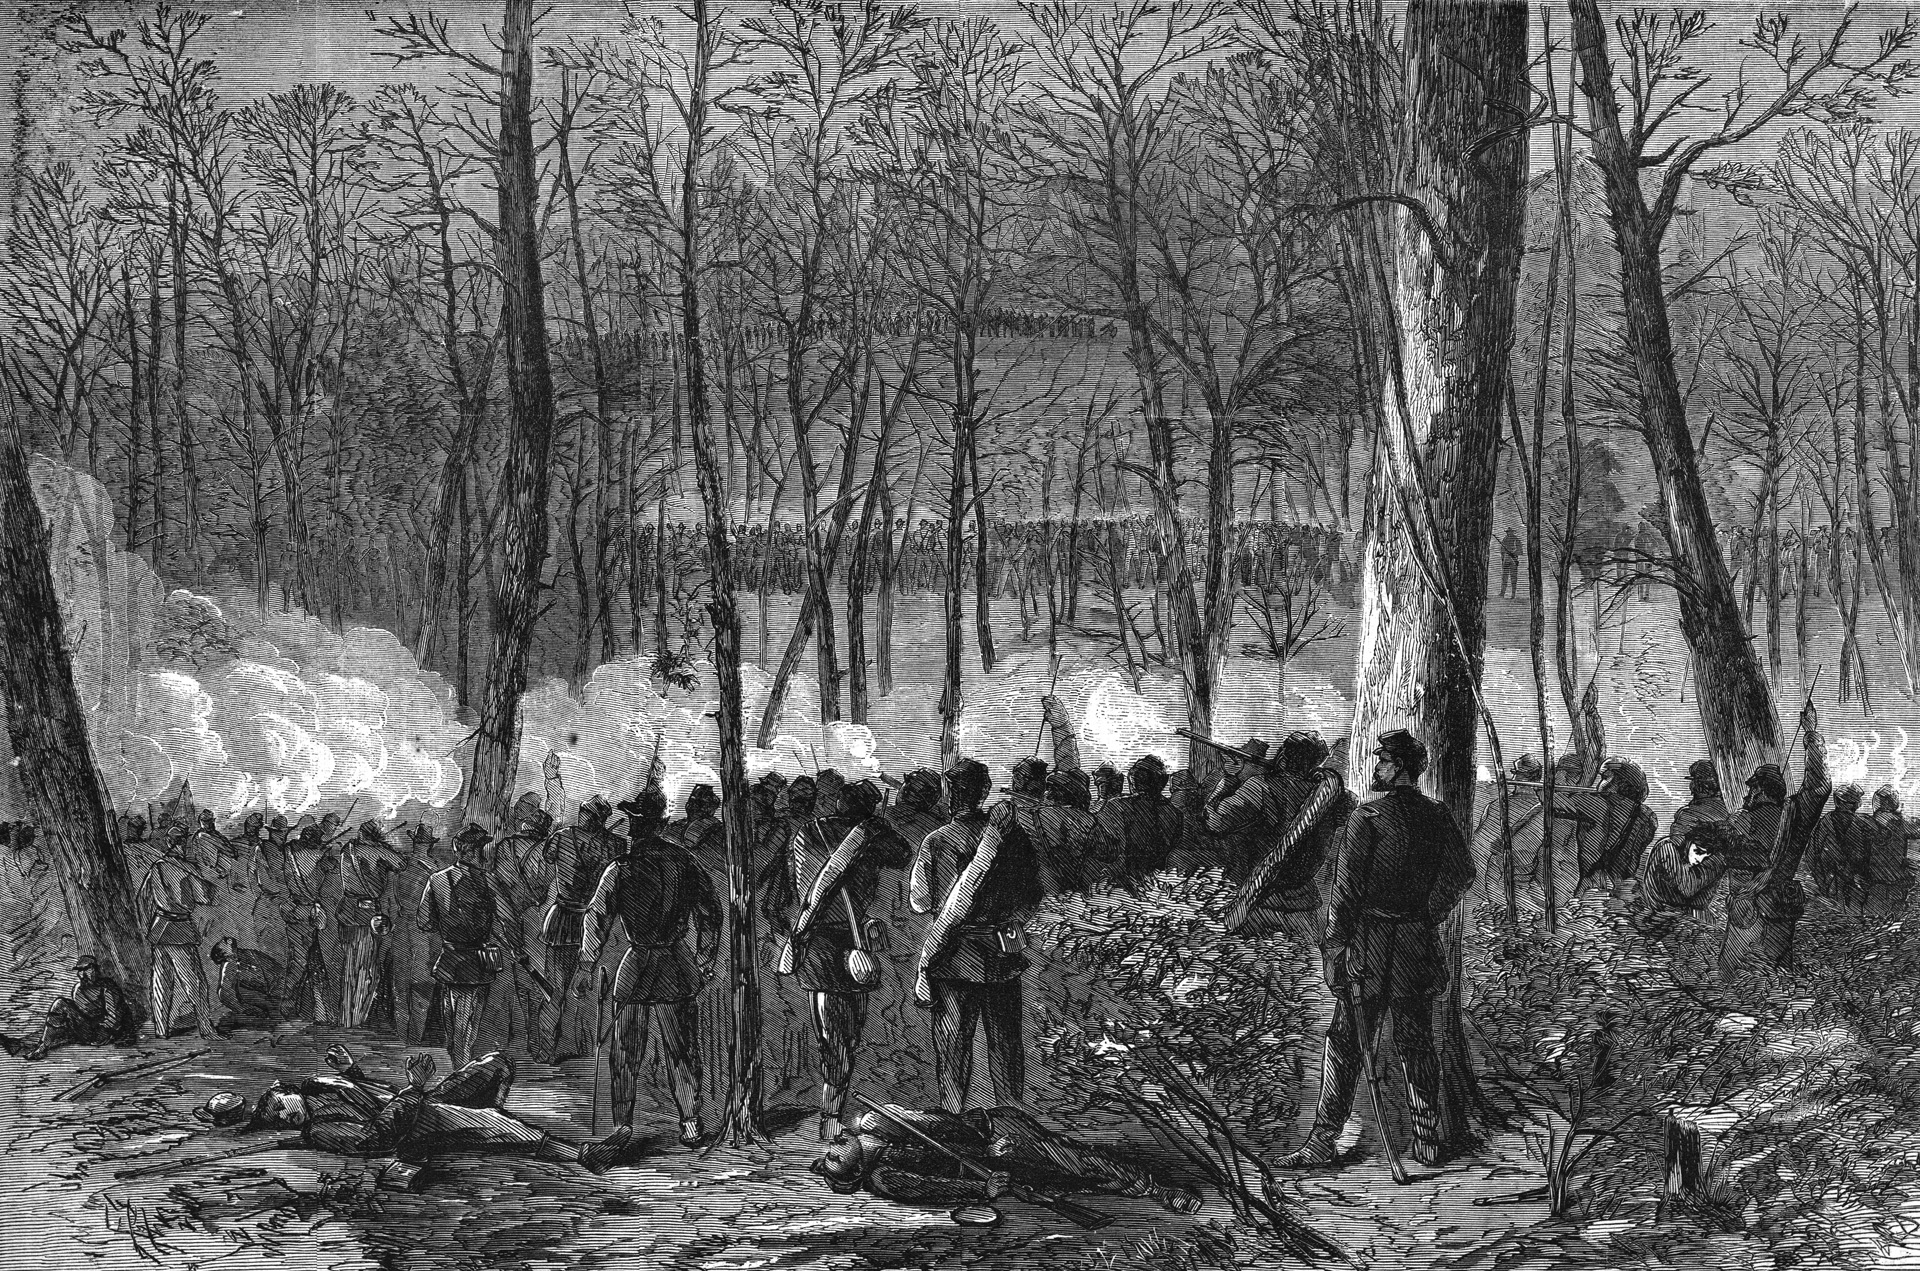 A Harper’s Weekly print published shortly after the battle depicts Union Brig. Gen. James S. Wadsworth leading his troops in the heavily forested Wilderness. Commanders on both sides found it difficult to maneuver their forces in the thick woods. 